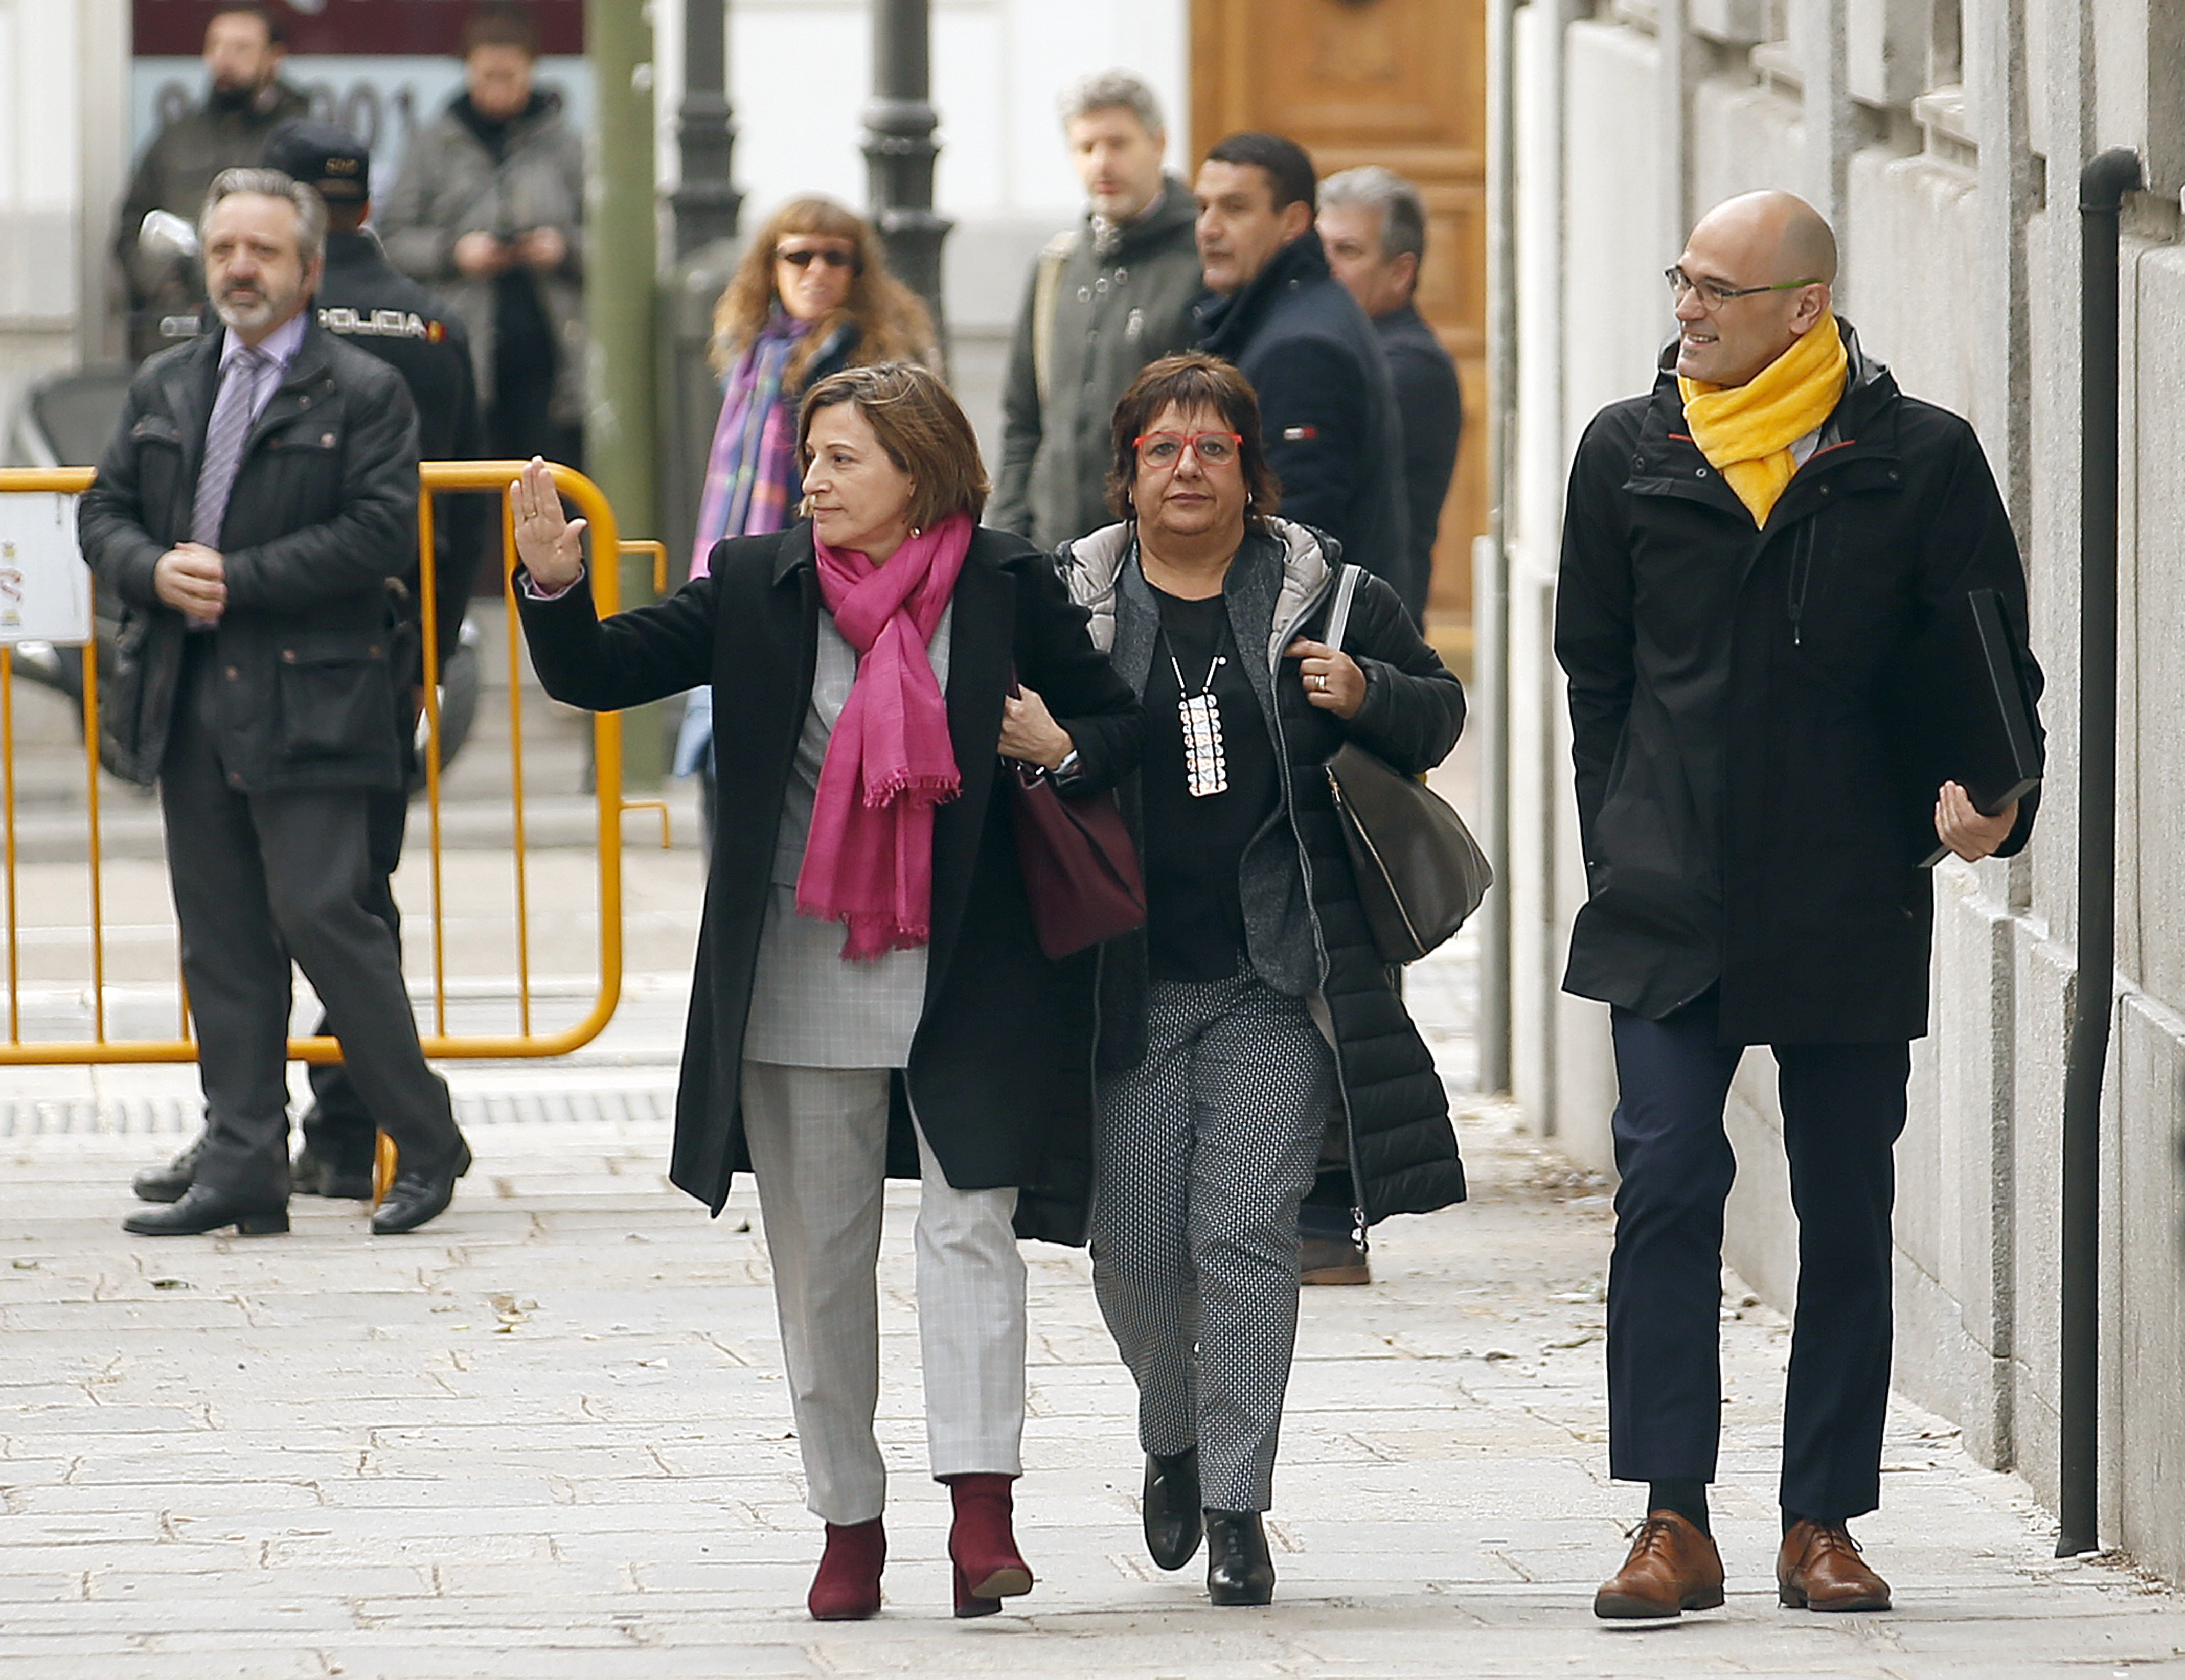 Former parliament speaker and MP Carme Forcadell (left), former MP Dolors Bassa (center), and MP Raül Romeva (right) on March 23 2018 (by Javier Barbancho)